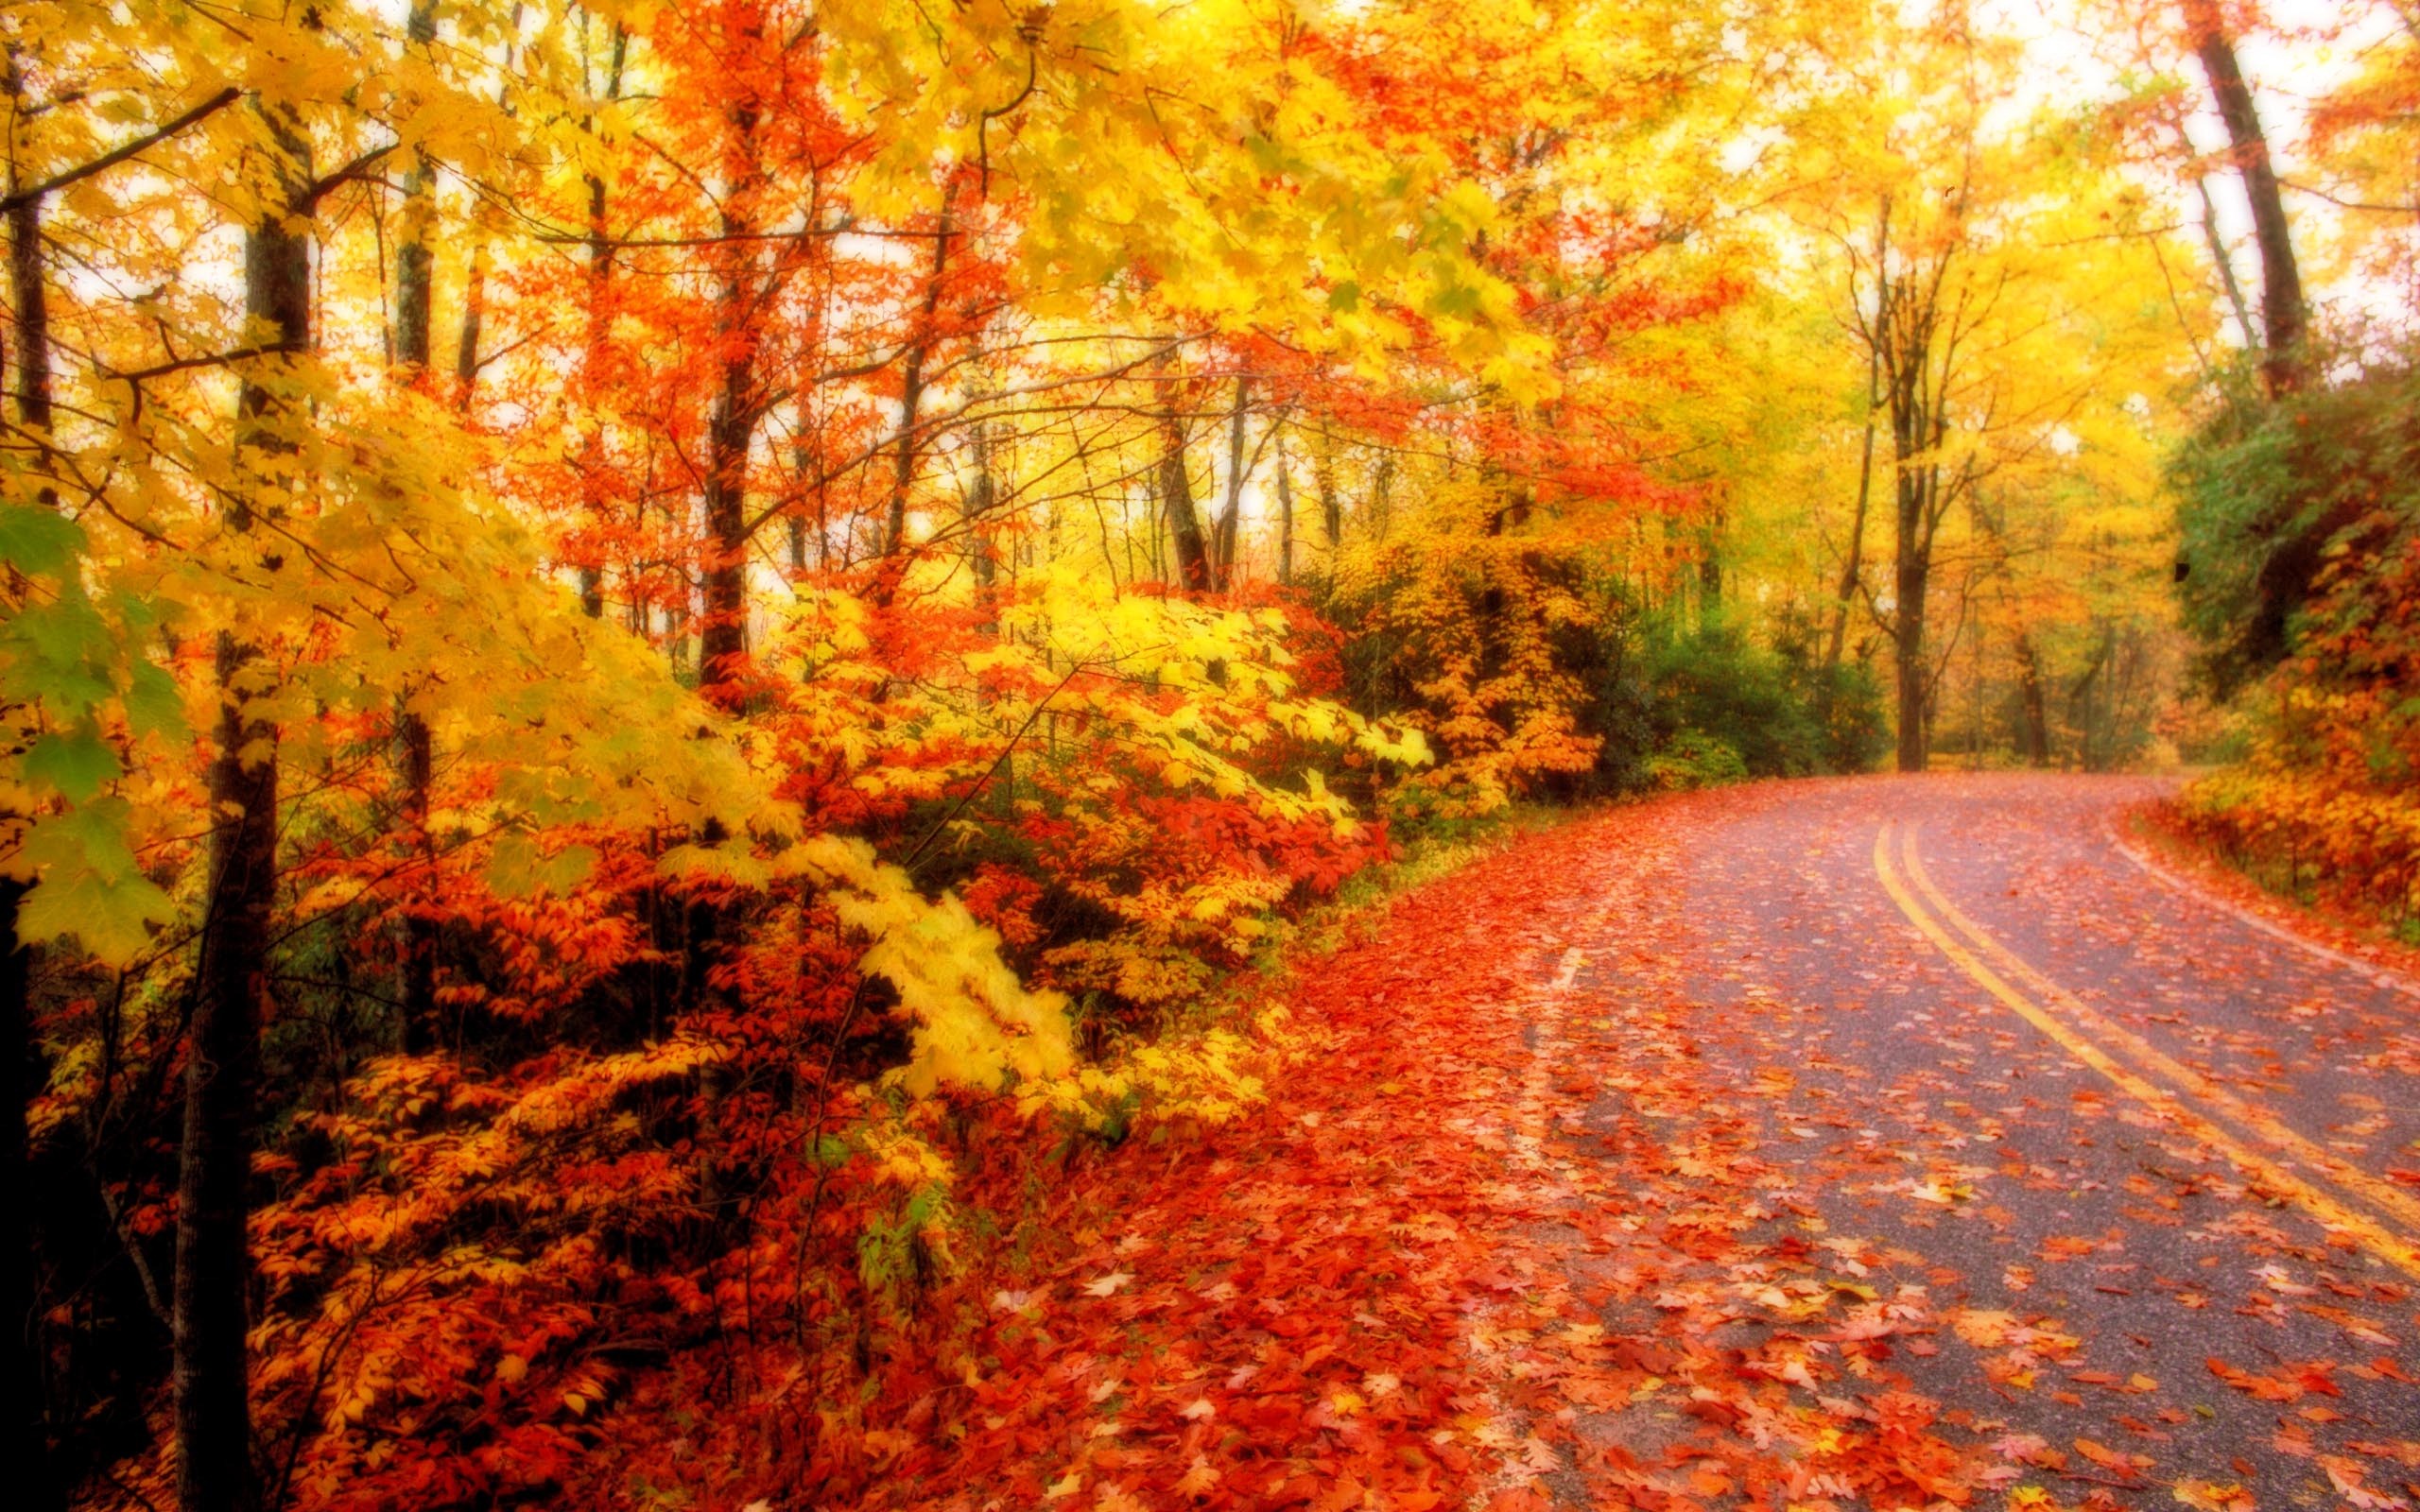  on July 9 2015 By admin Comments Off on Fall Foliage Wallpaper